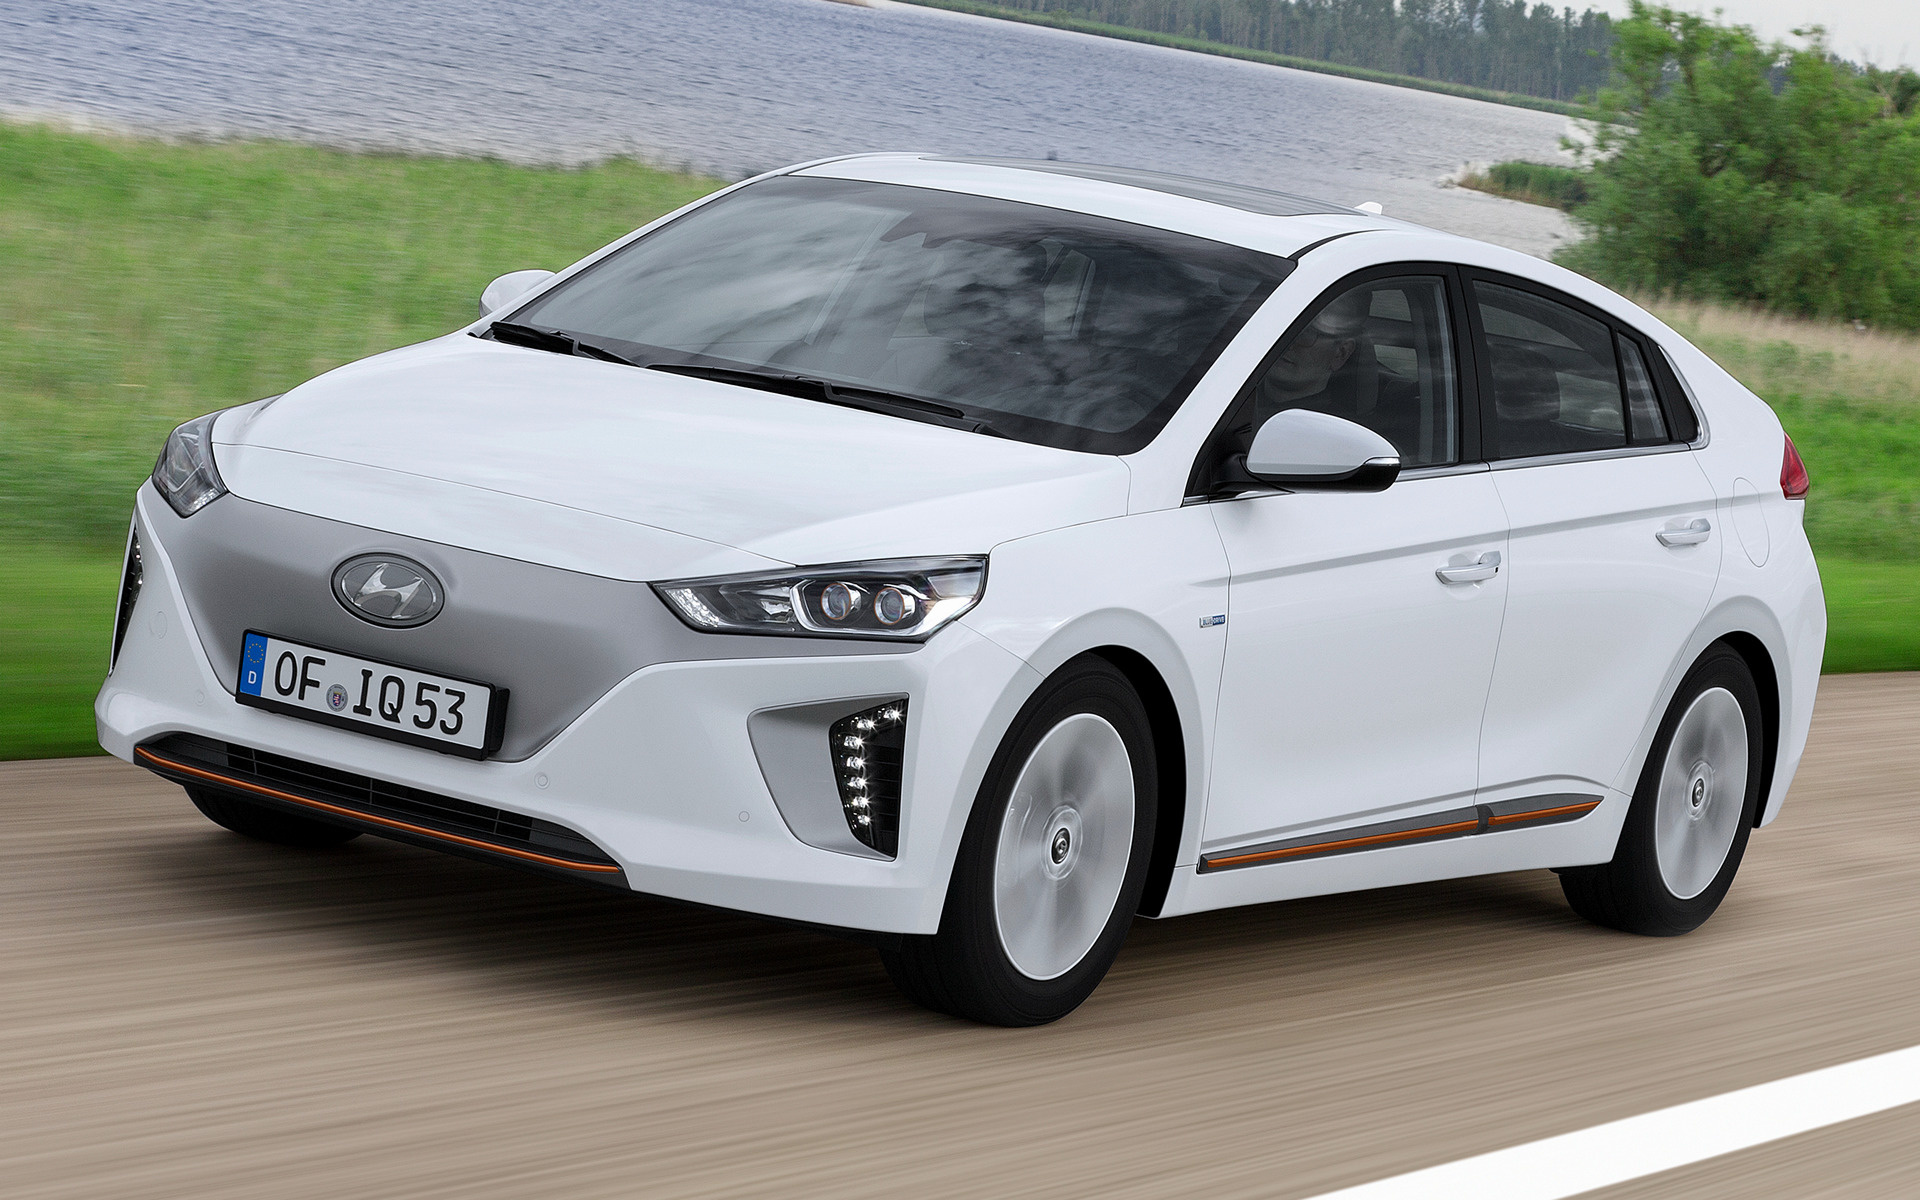 Levering Bijdrage De stad 2016 Hyundai Ioniq Electric - Wallpapers and HD Images | Car Pixel